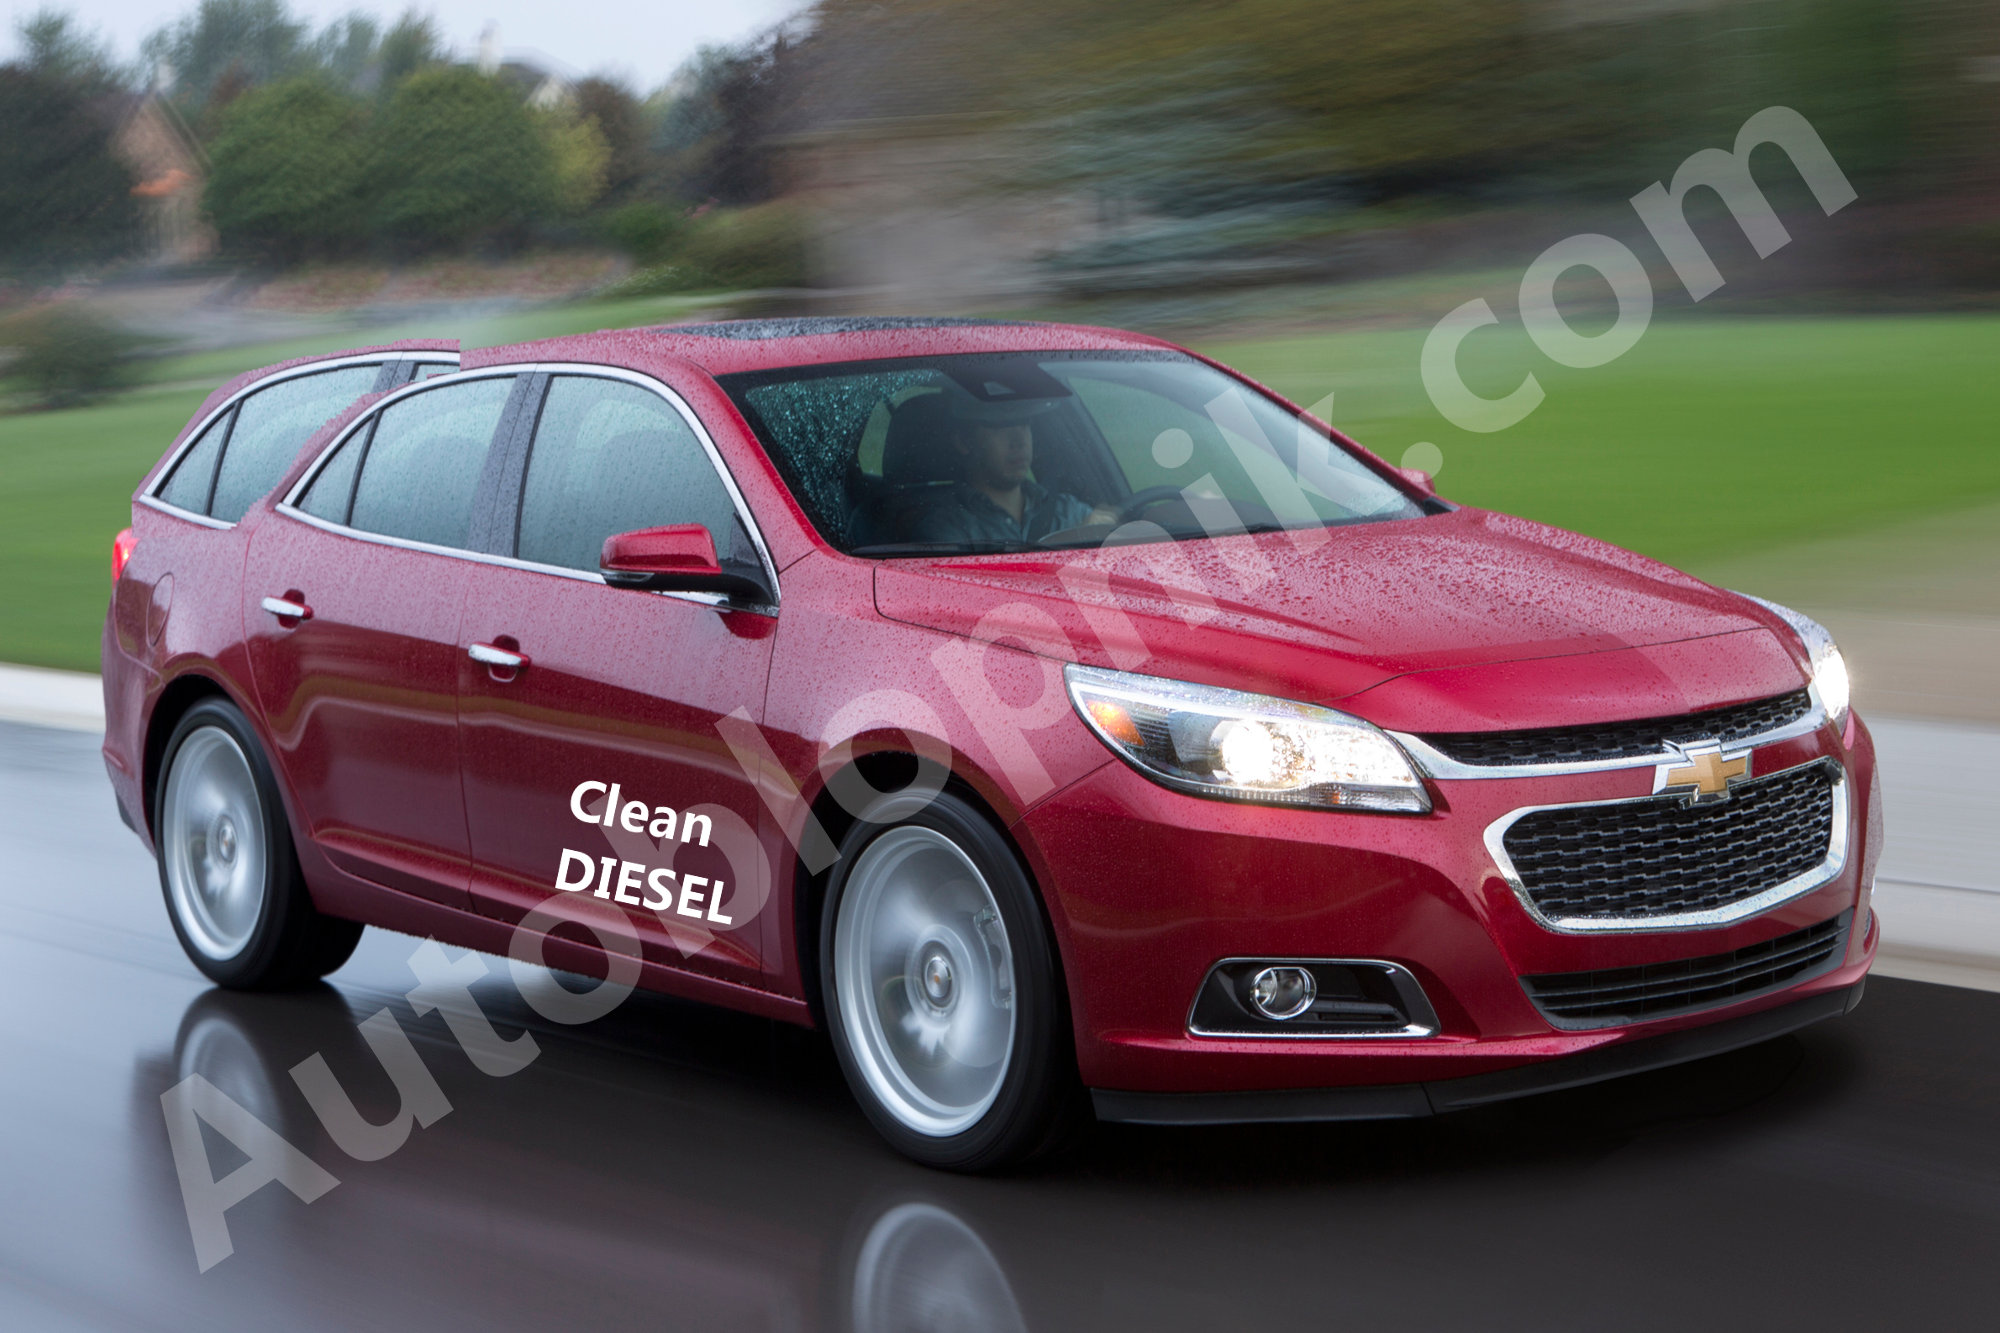 A poorly-paid artist's rendering of the 2015 Malibu Diesel Wagon, yesterday